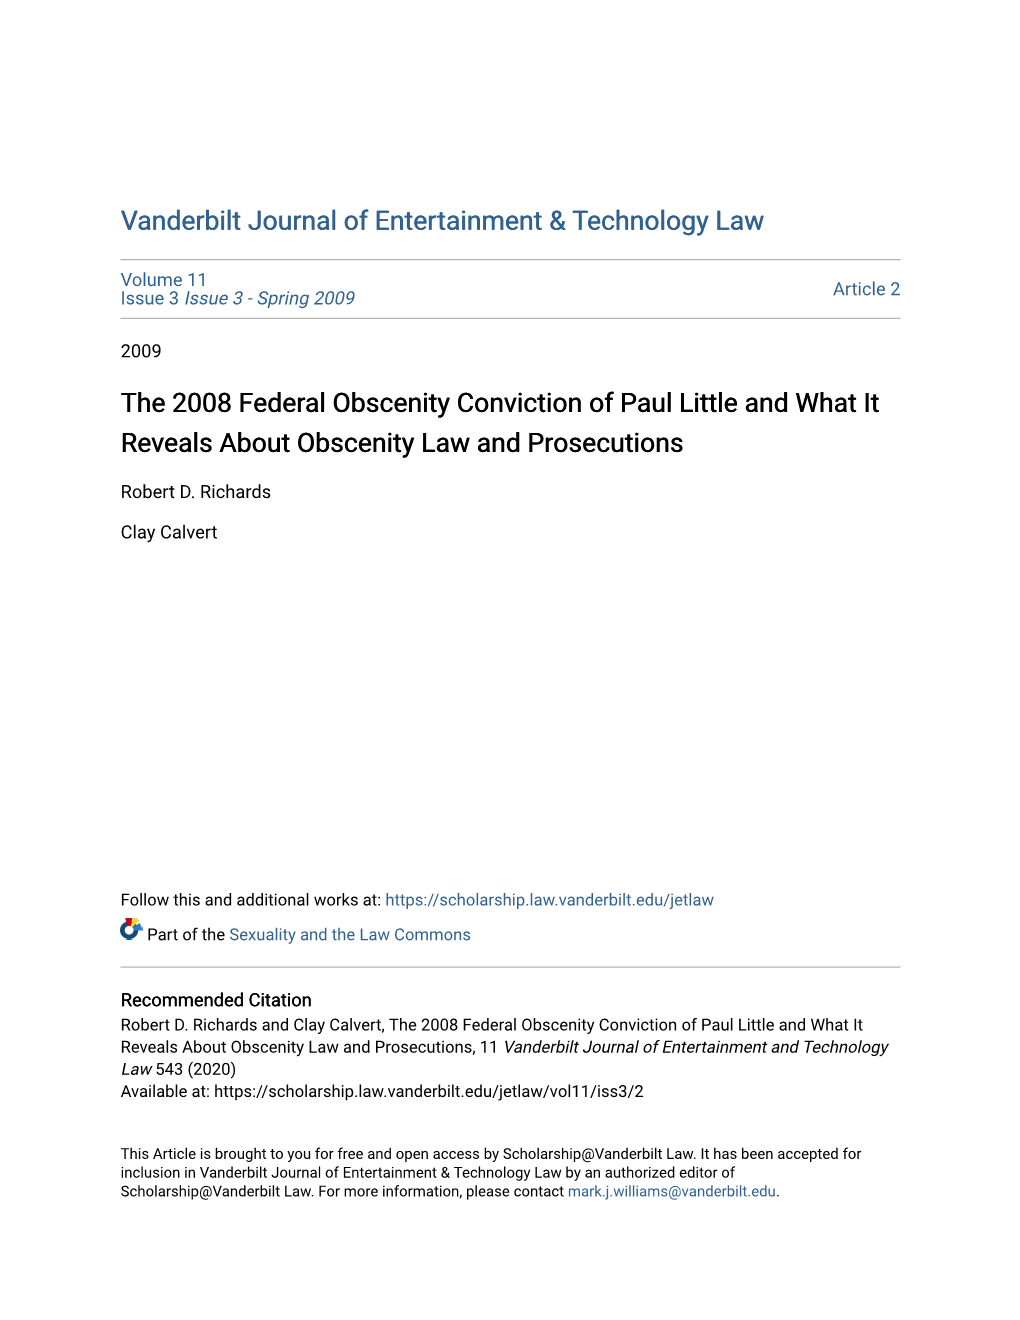 The 2008 Federal Obscenity Conviction of Paul Little and What It Reveals About Obscenity Law and Prosecutions